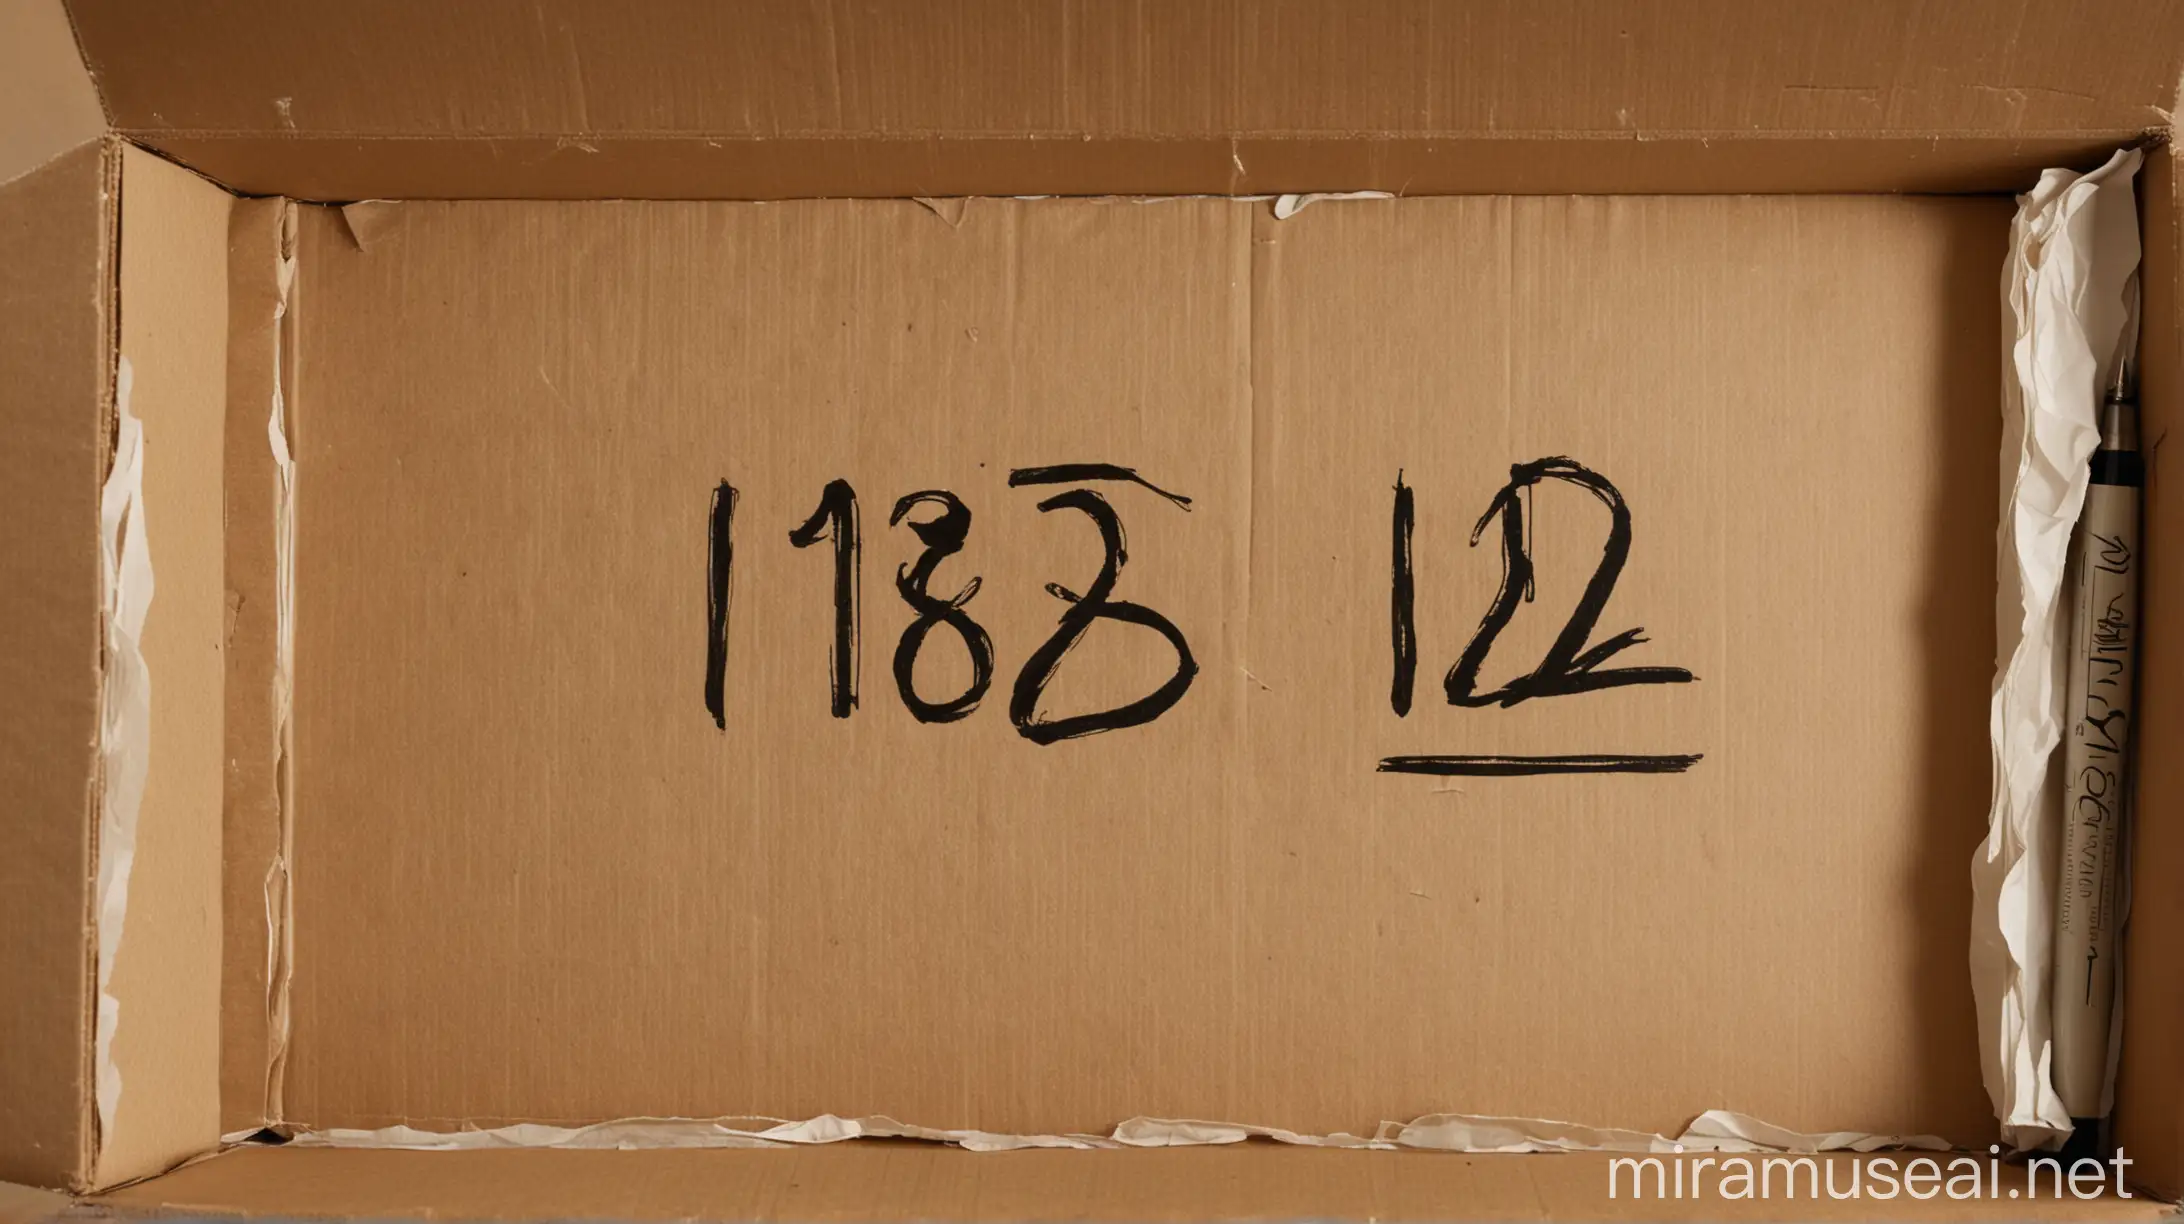 Inside the cardboard box is a piece of paper with the number 1882 written in black pen.